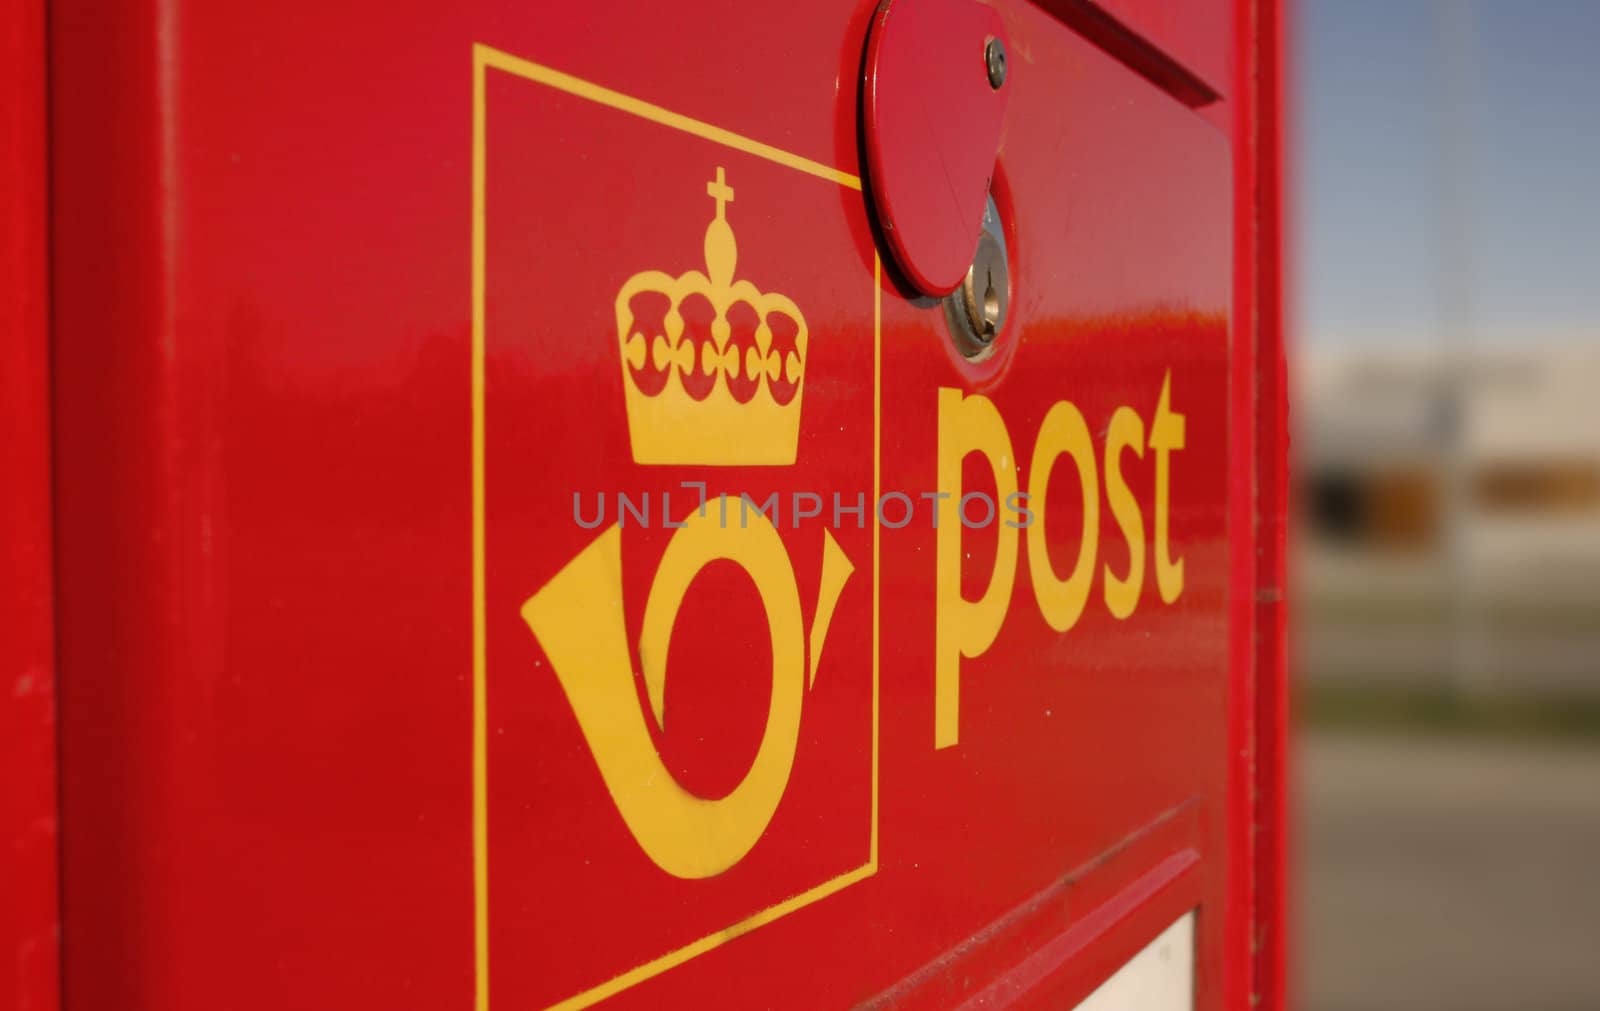 The classical red norwegian letter box, used by Posten Norge for collecting letters and postcards.